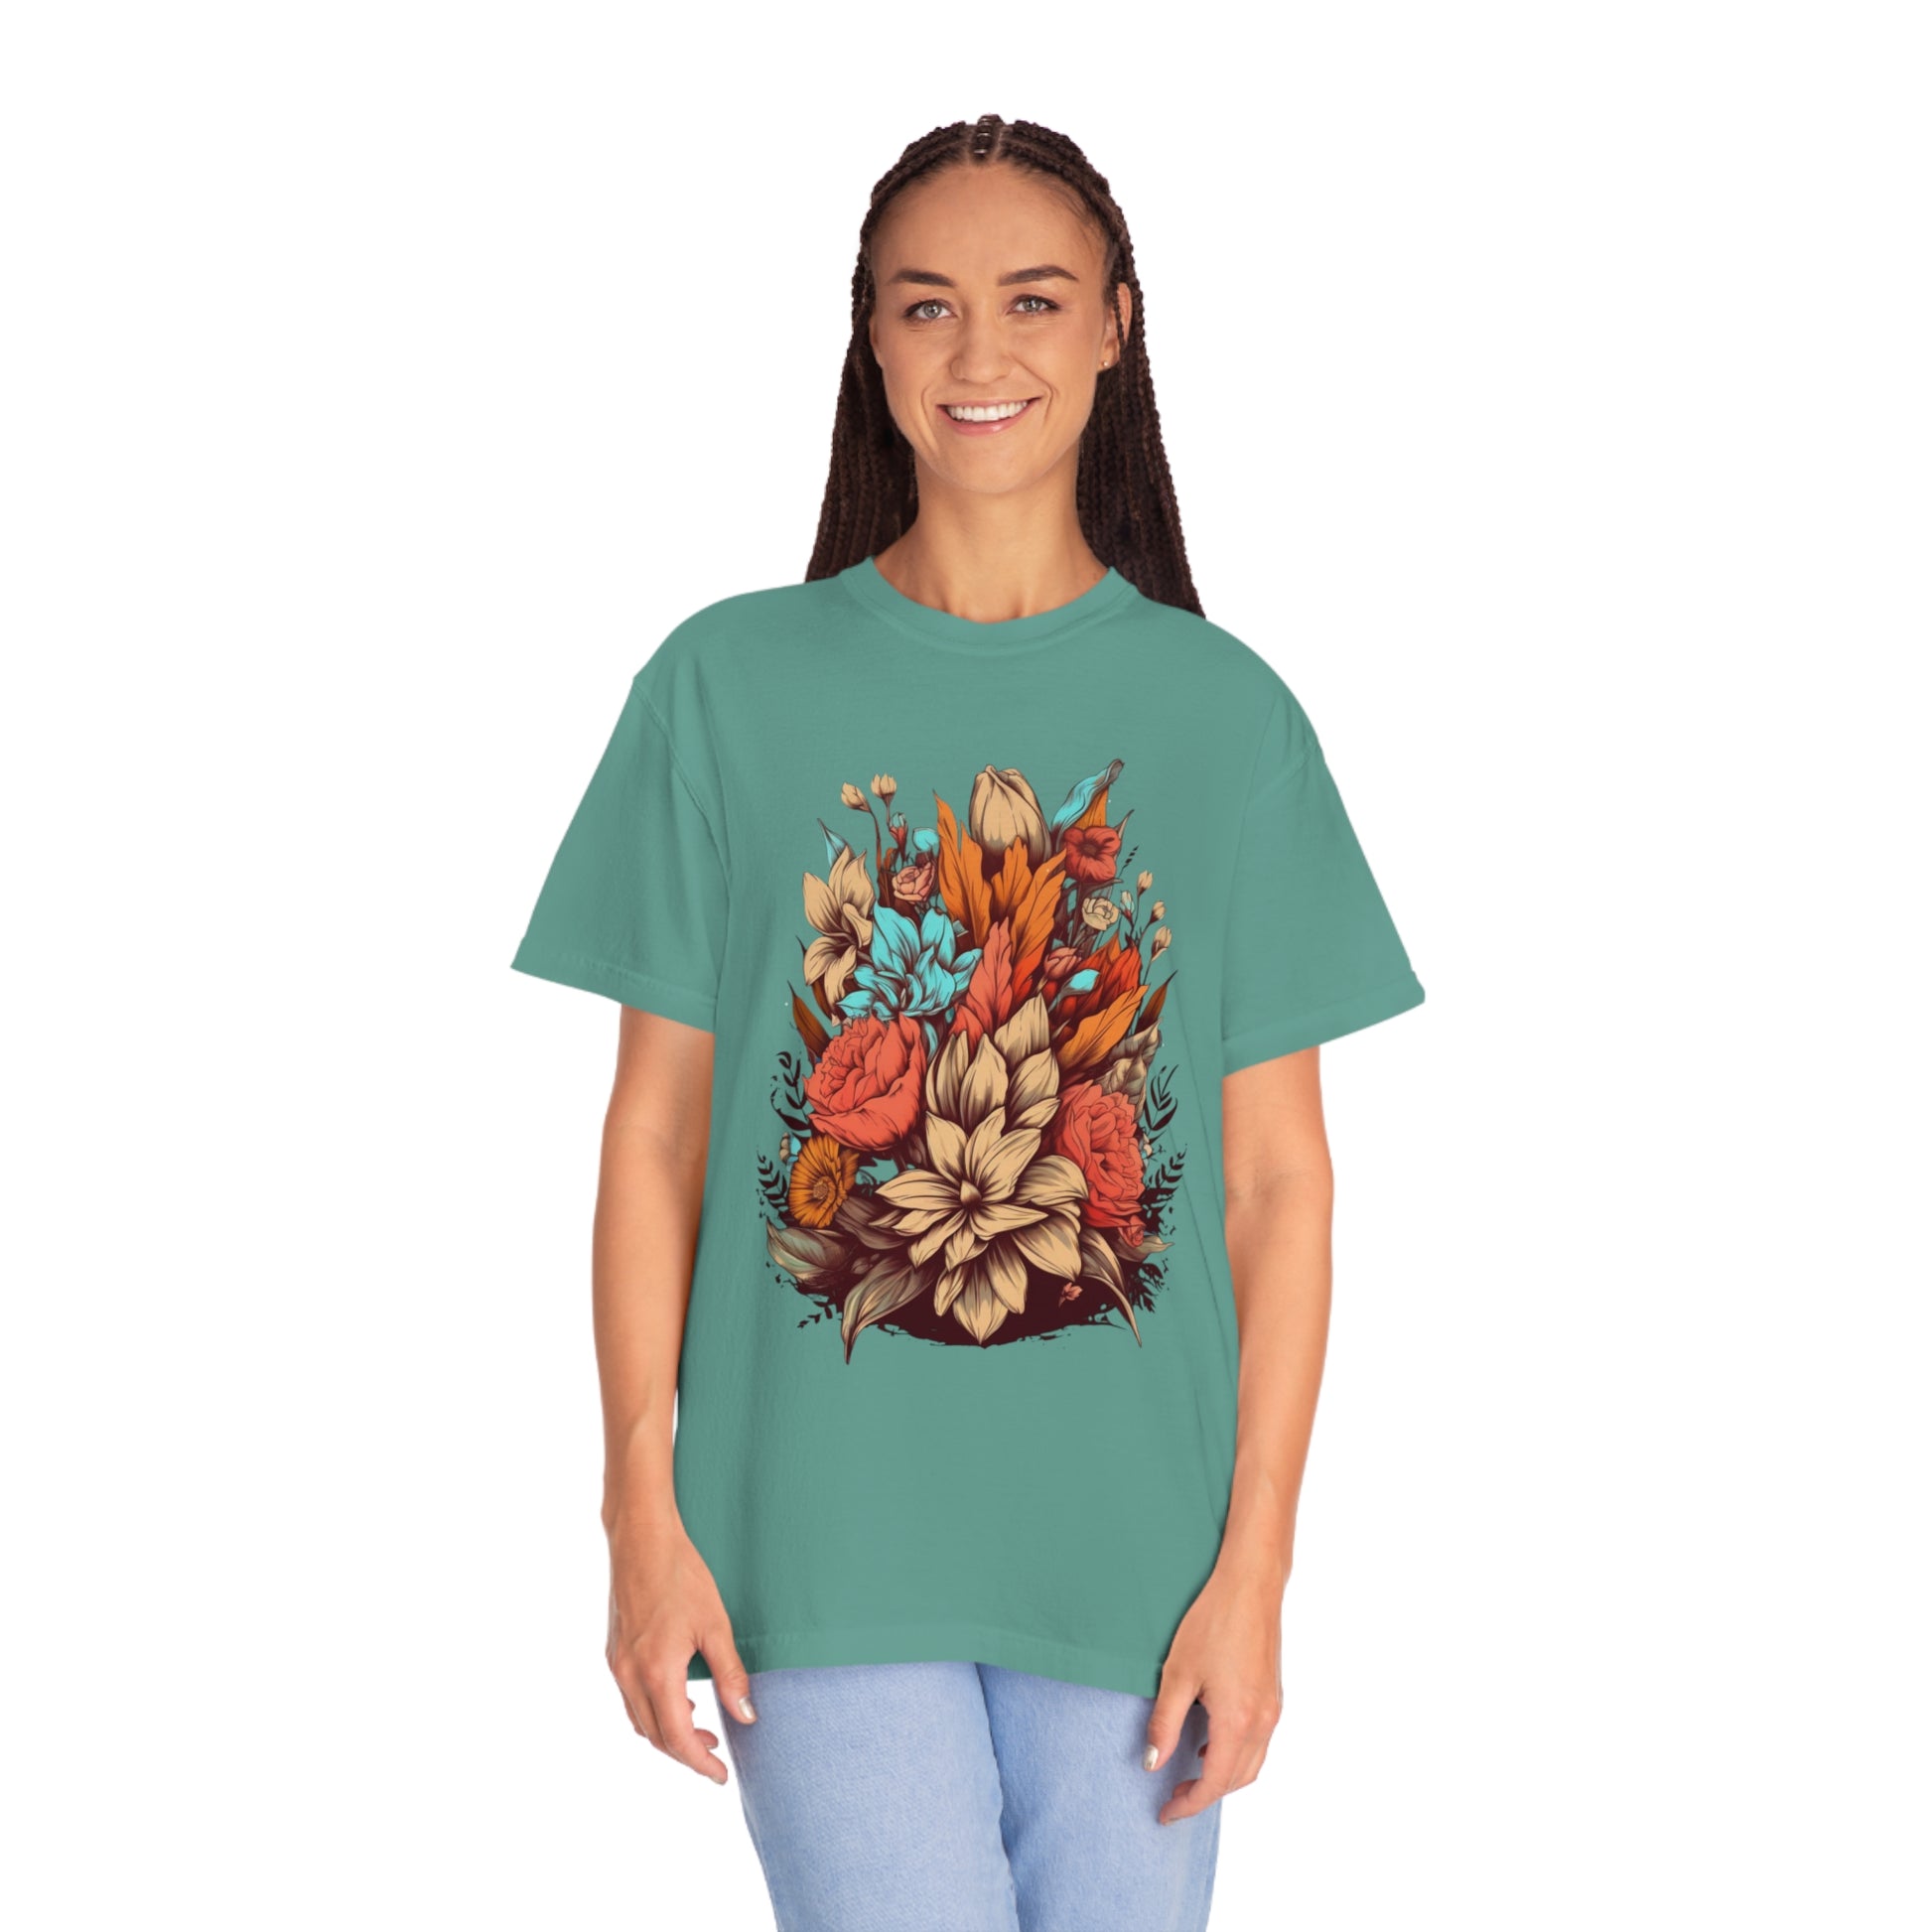 Boho Wildflowers Floral Nature Shirt | Garment Dyed Boho Tee for Nature Lovers T-Shirt Light Green S 